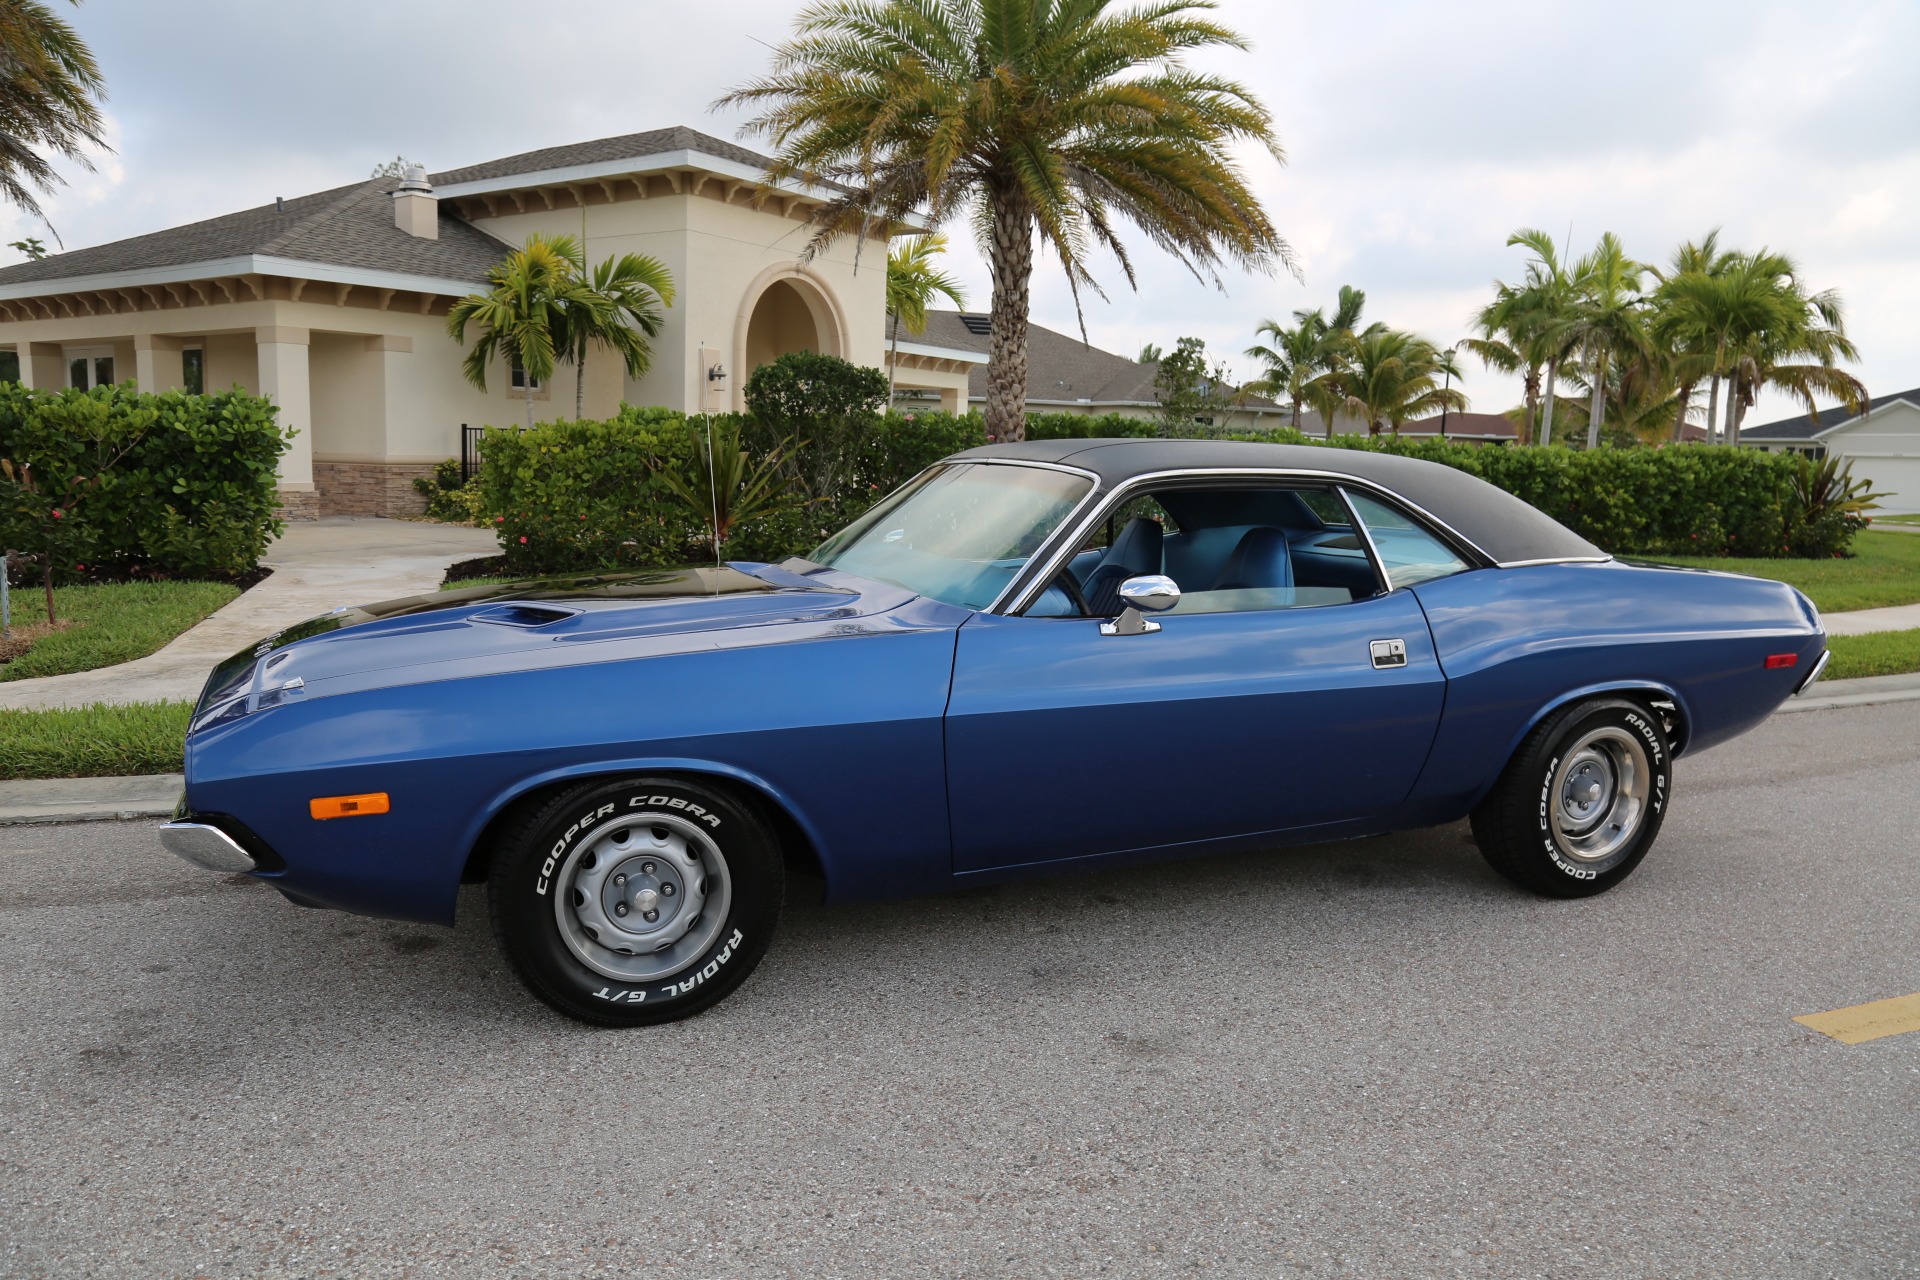 Used 1973 Dodge Challenger 360 V8 Automatic for sale Sold at Muscle Cars for Sale Inc. in Fort Myers FL 33912 7